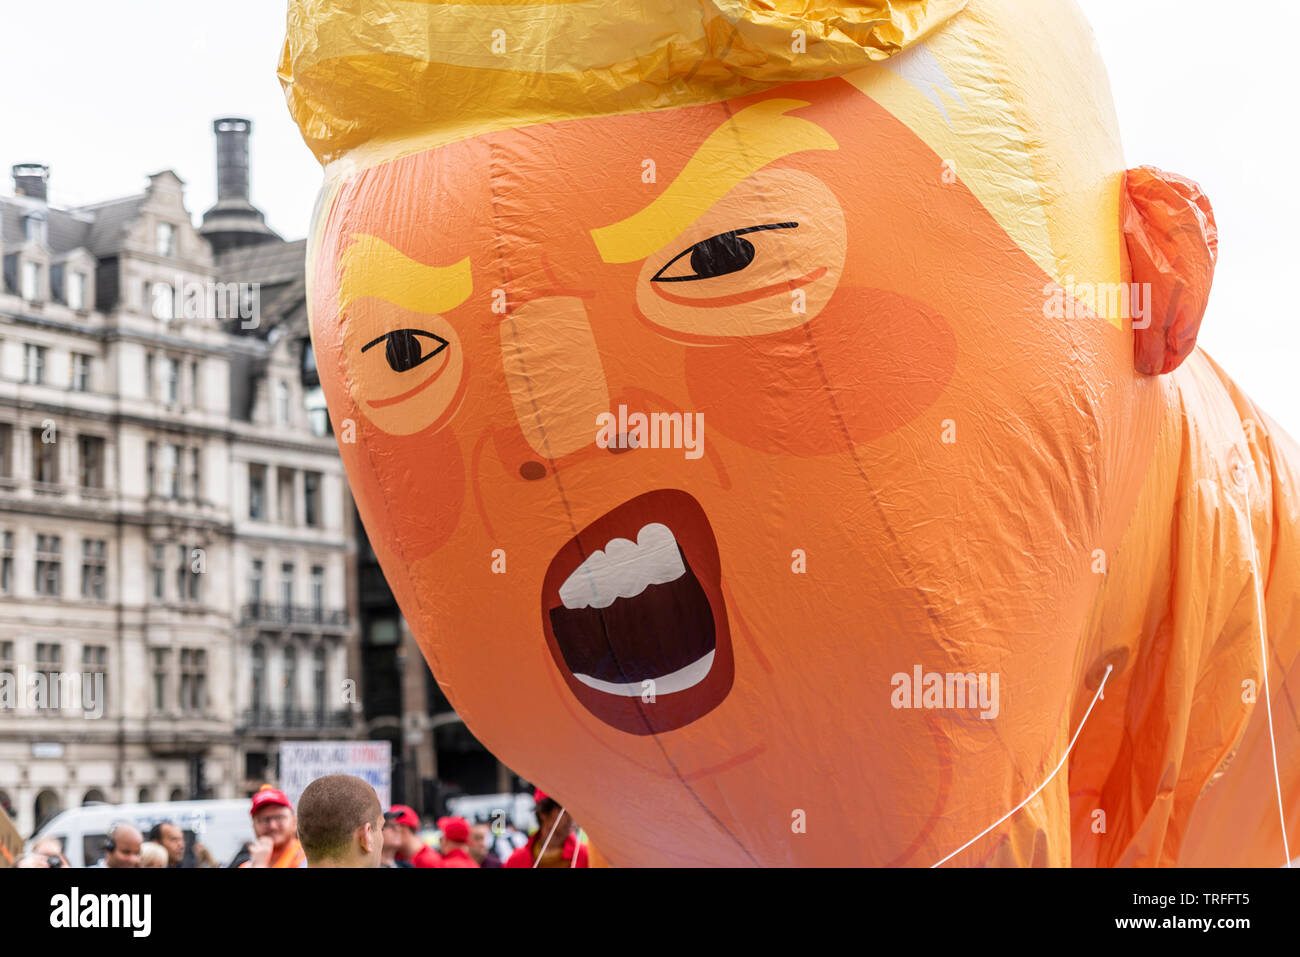 Donald Trump baby blimp balloon in Parliament Square, London, UK during US President State Visit. Face during inflation. Angry appearance Stock Photo